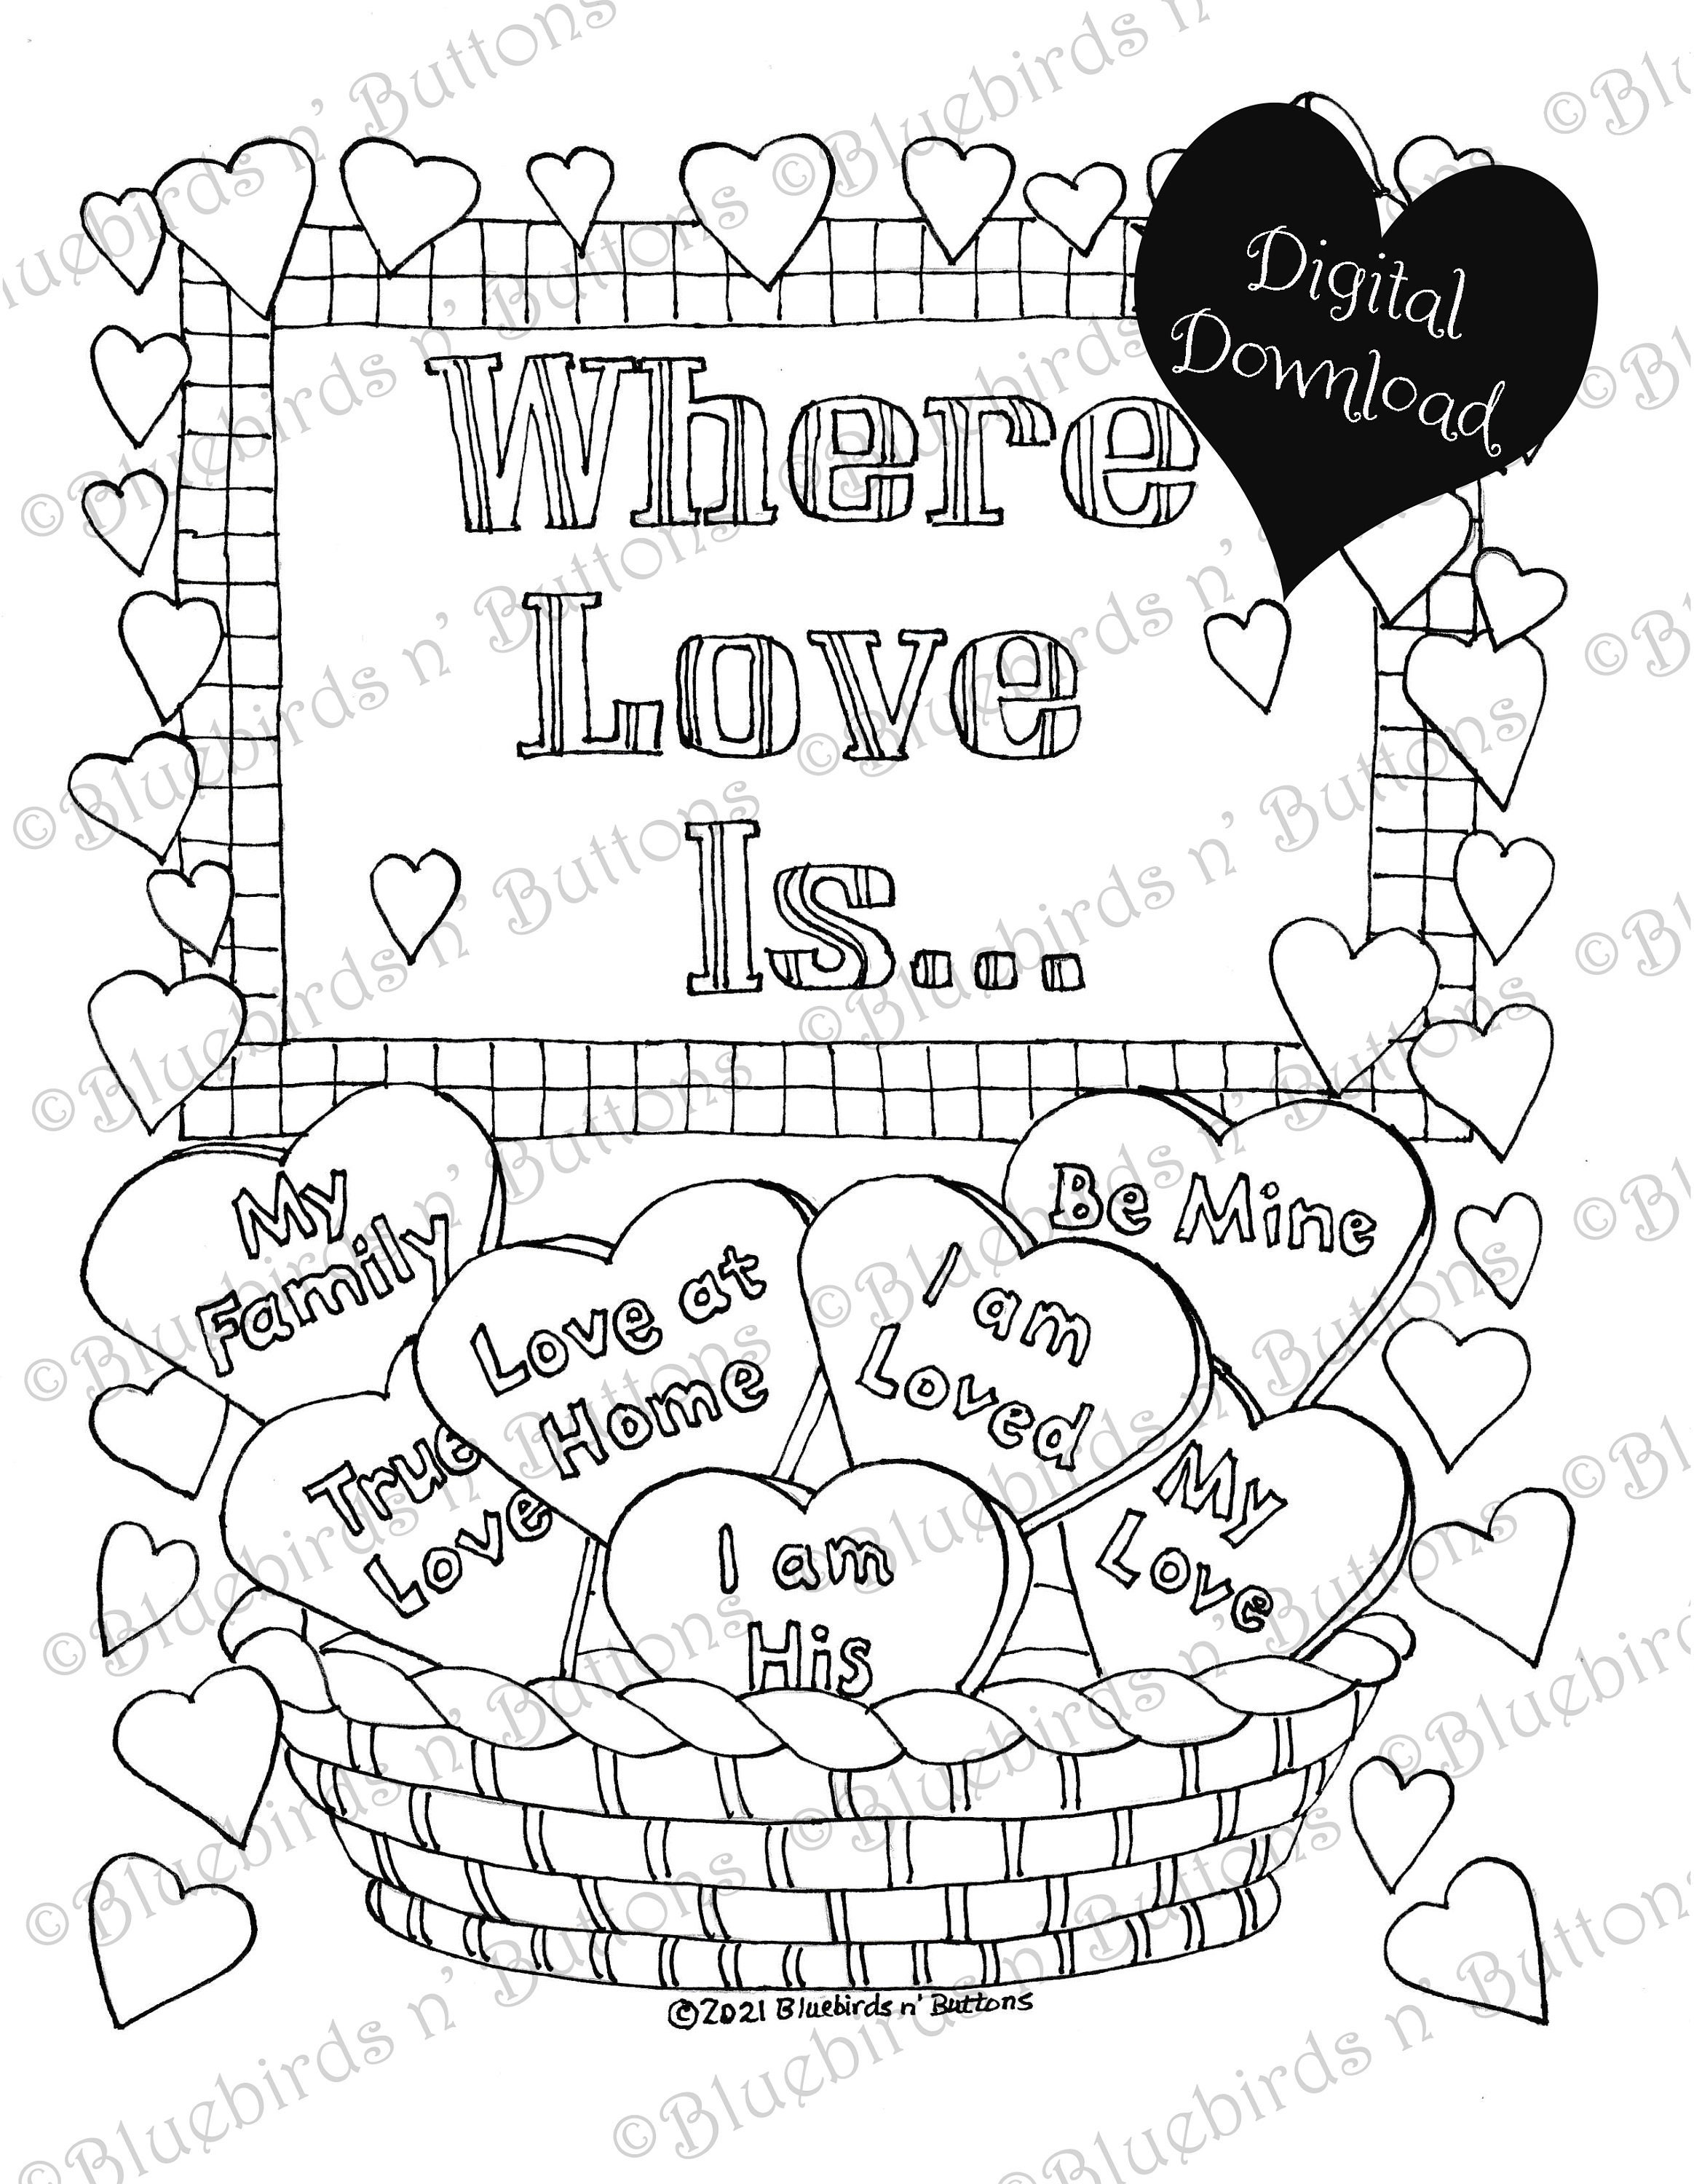 Printable coloring page february where love is adult coloring digital download